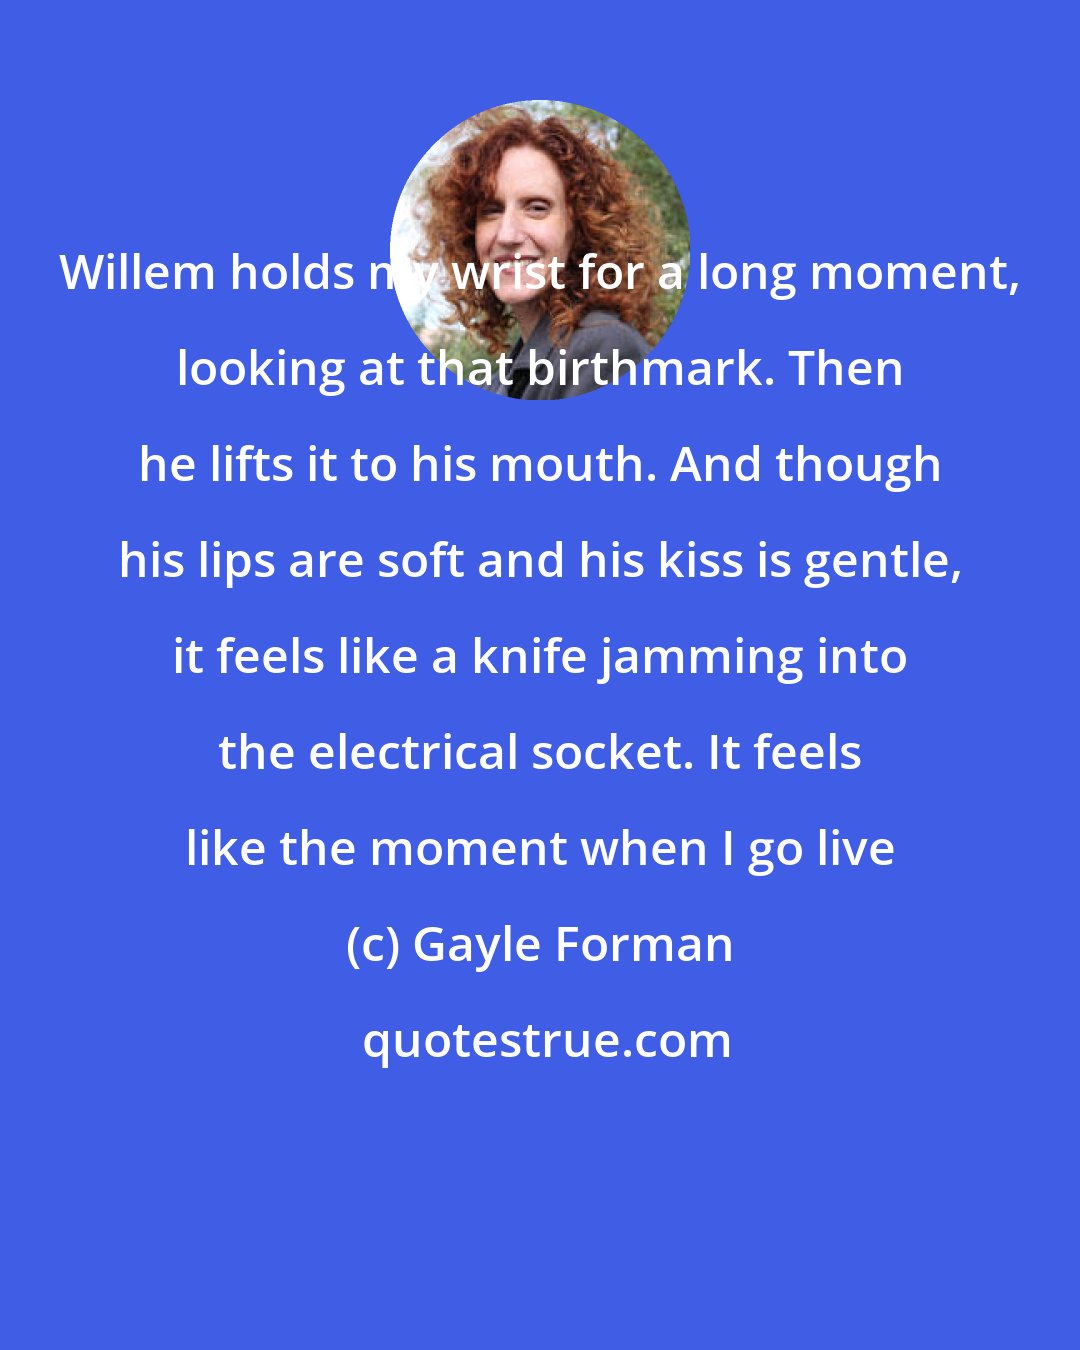 Gayle Forman: Willem holds my wrist for a long moment, looking at that birthmark. Then he lifts it to his mouth. And though his lips are soft and his kiss is gentle, it feels like a knife jamming into the electrical socket. It feels like the moment when I go live